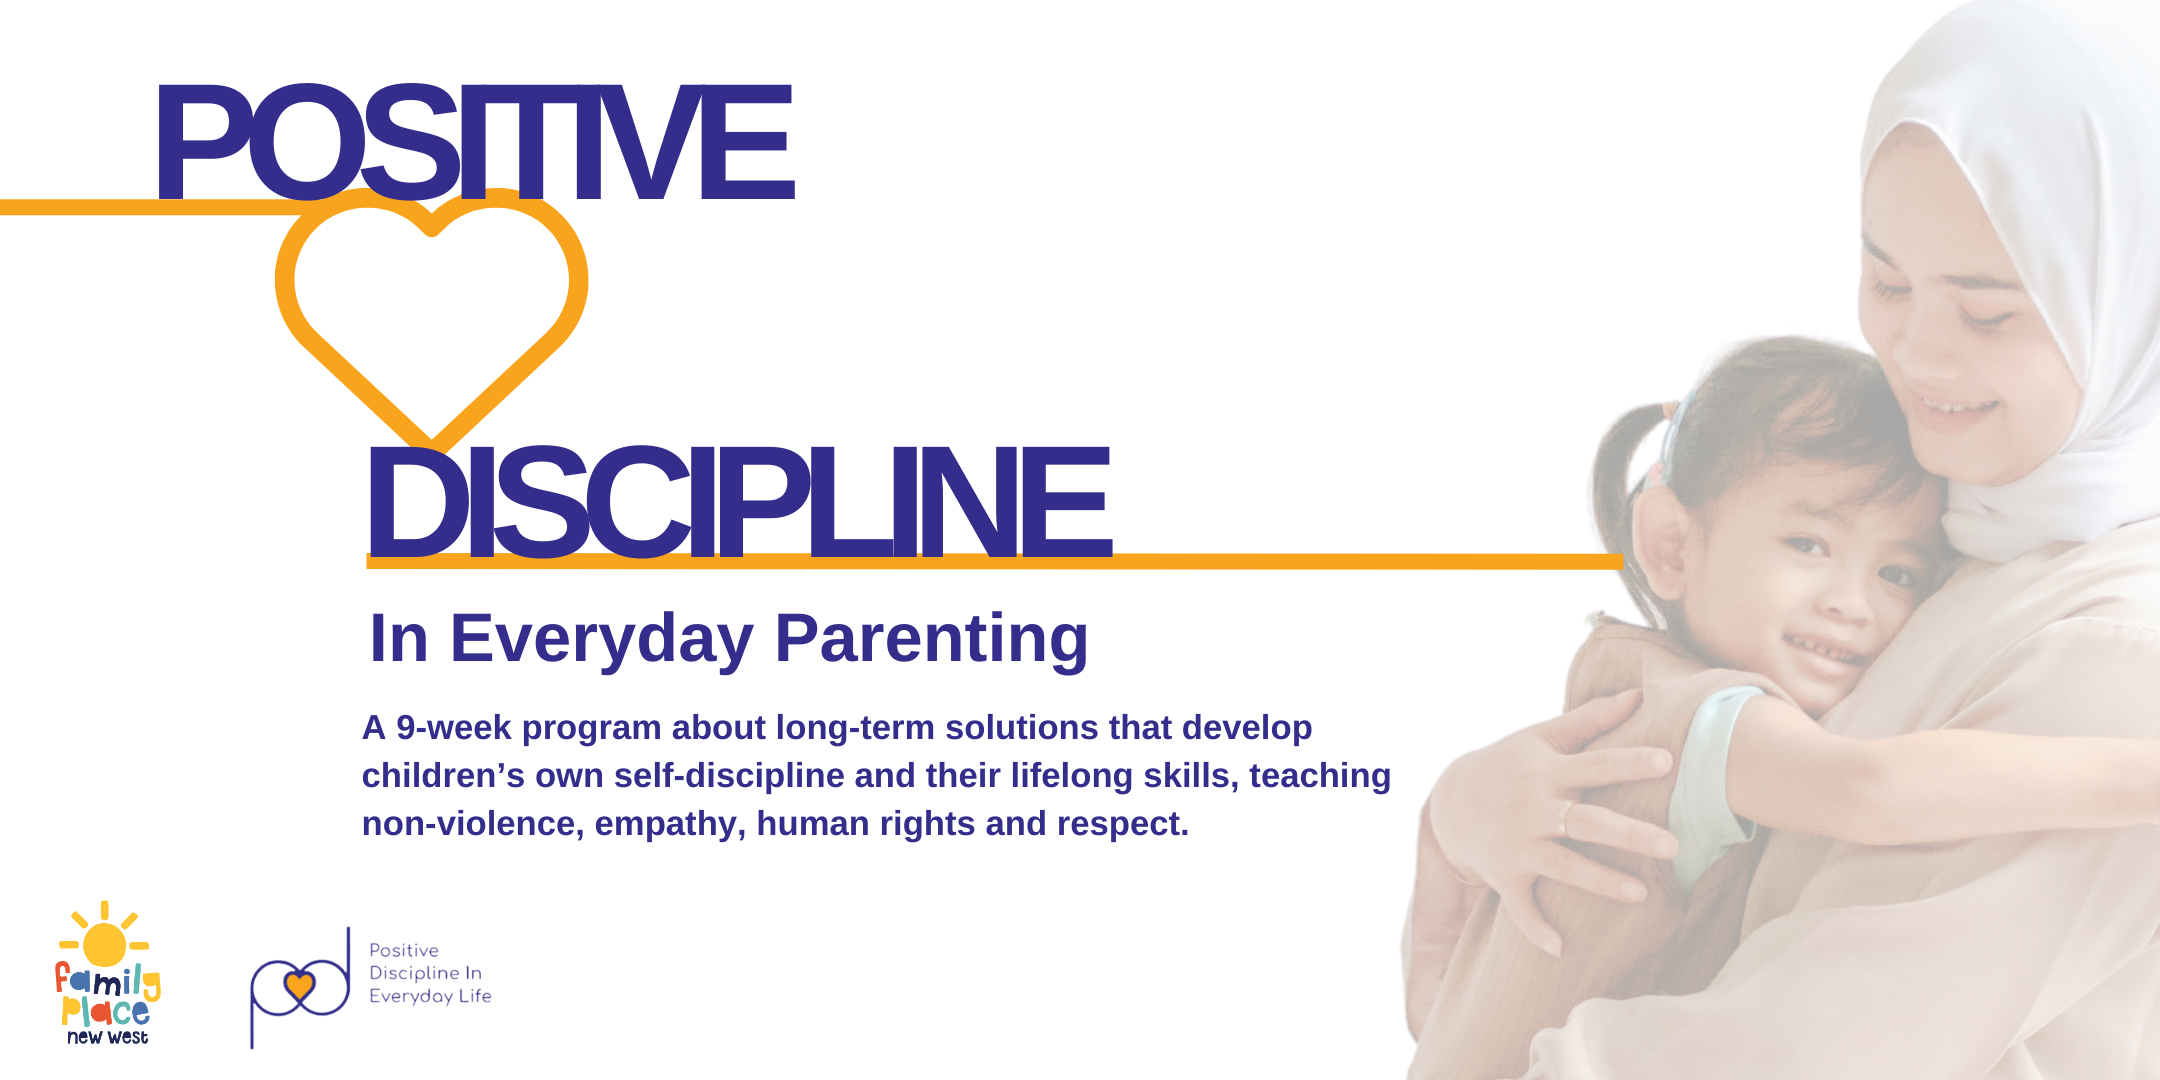 Image of a woman and child with Positive Discipline program information